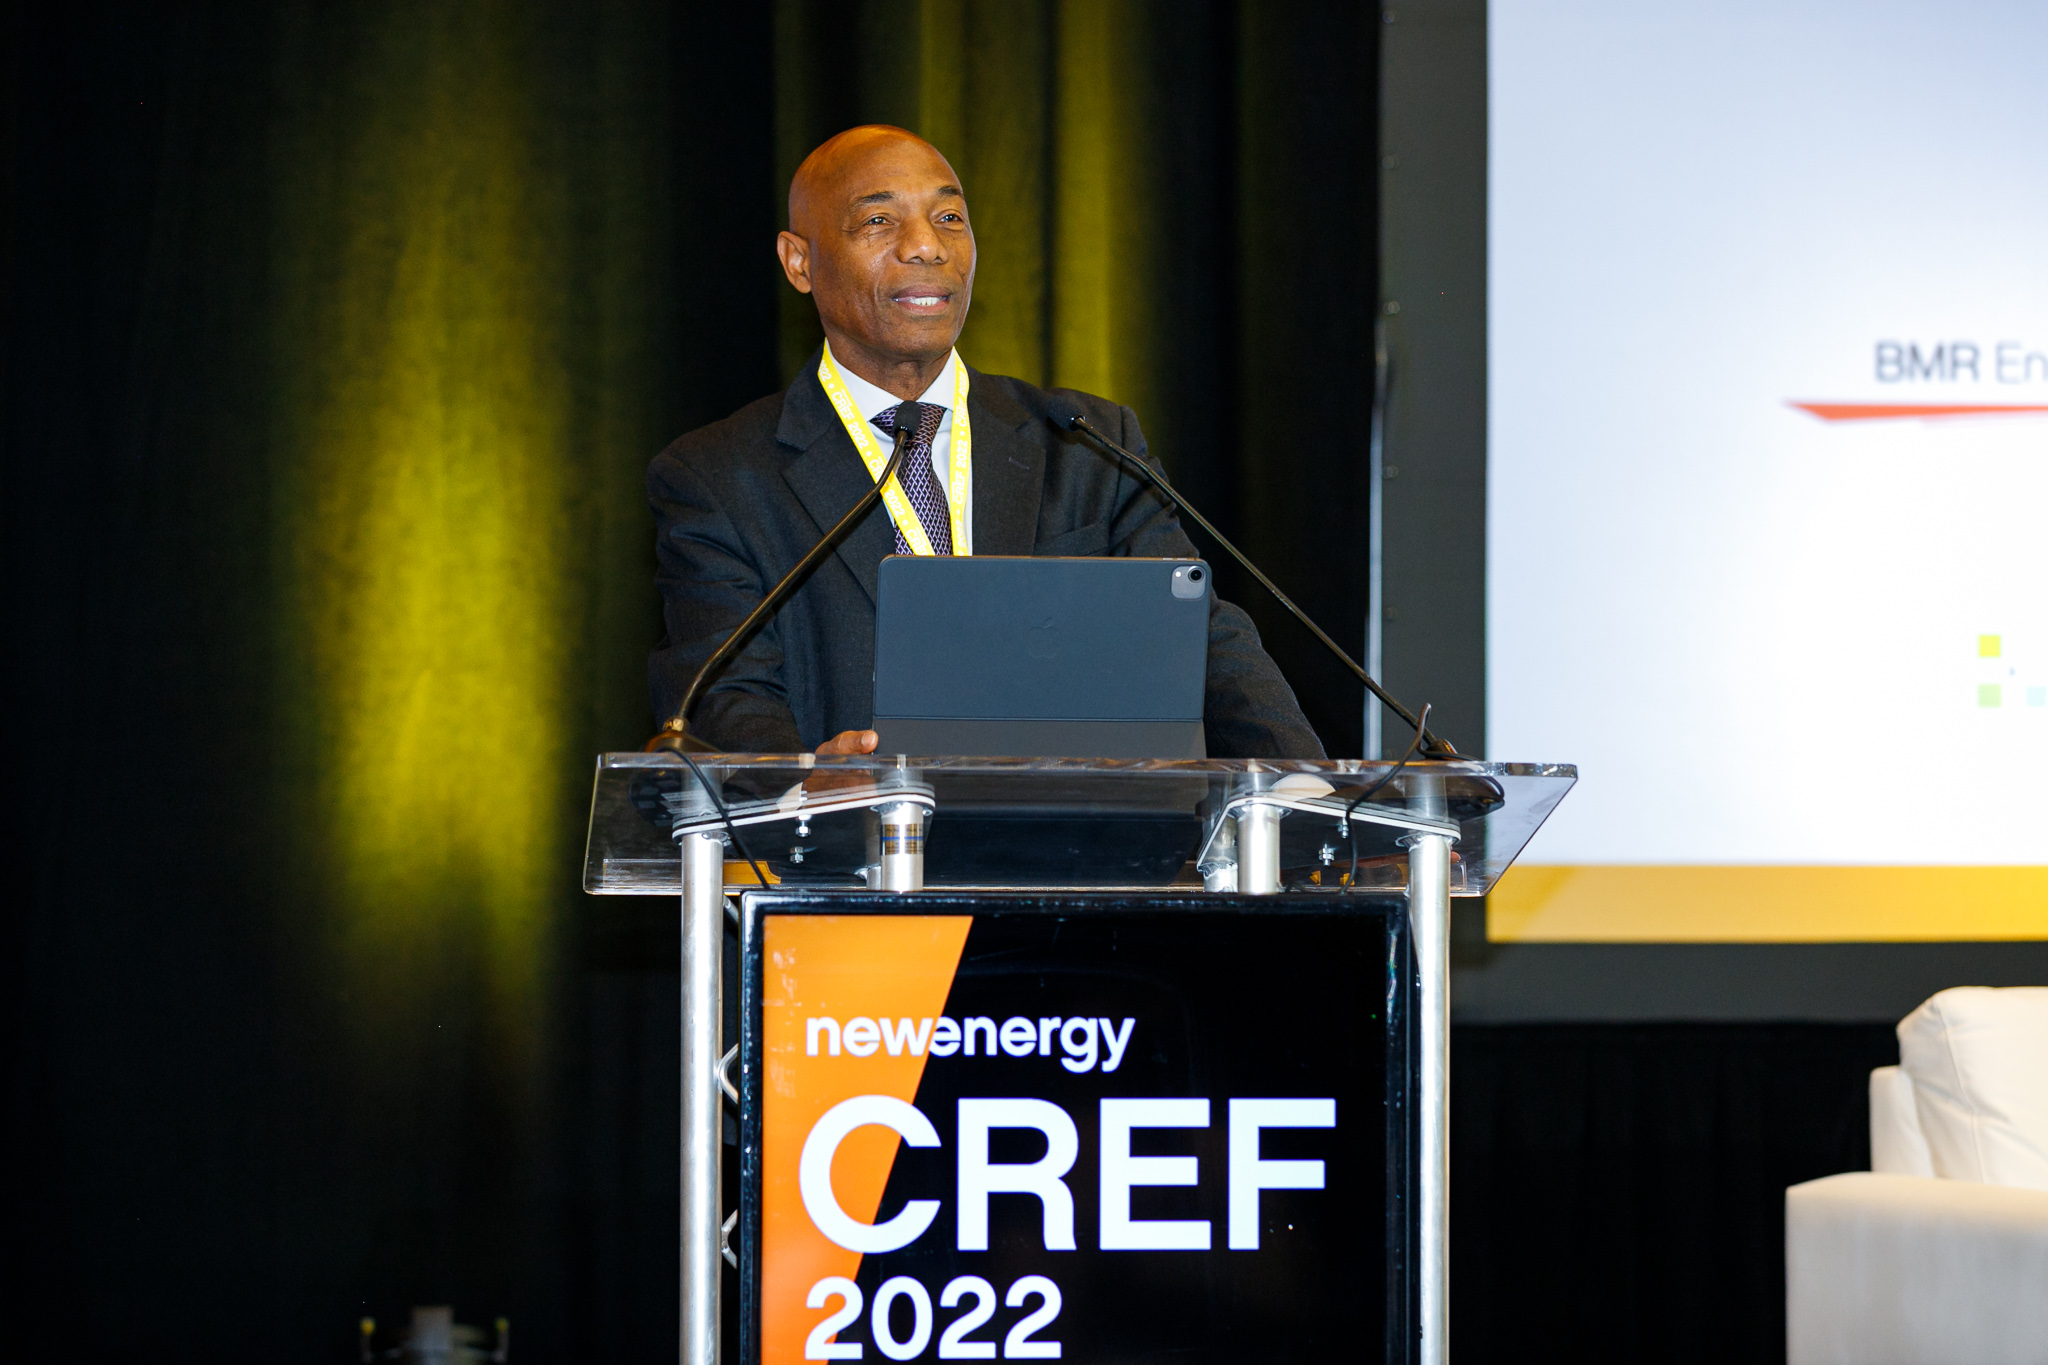 Dr. Leon wearing a dark suit standing lectern with CREF branding